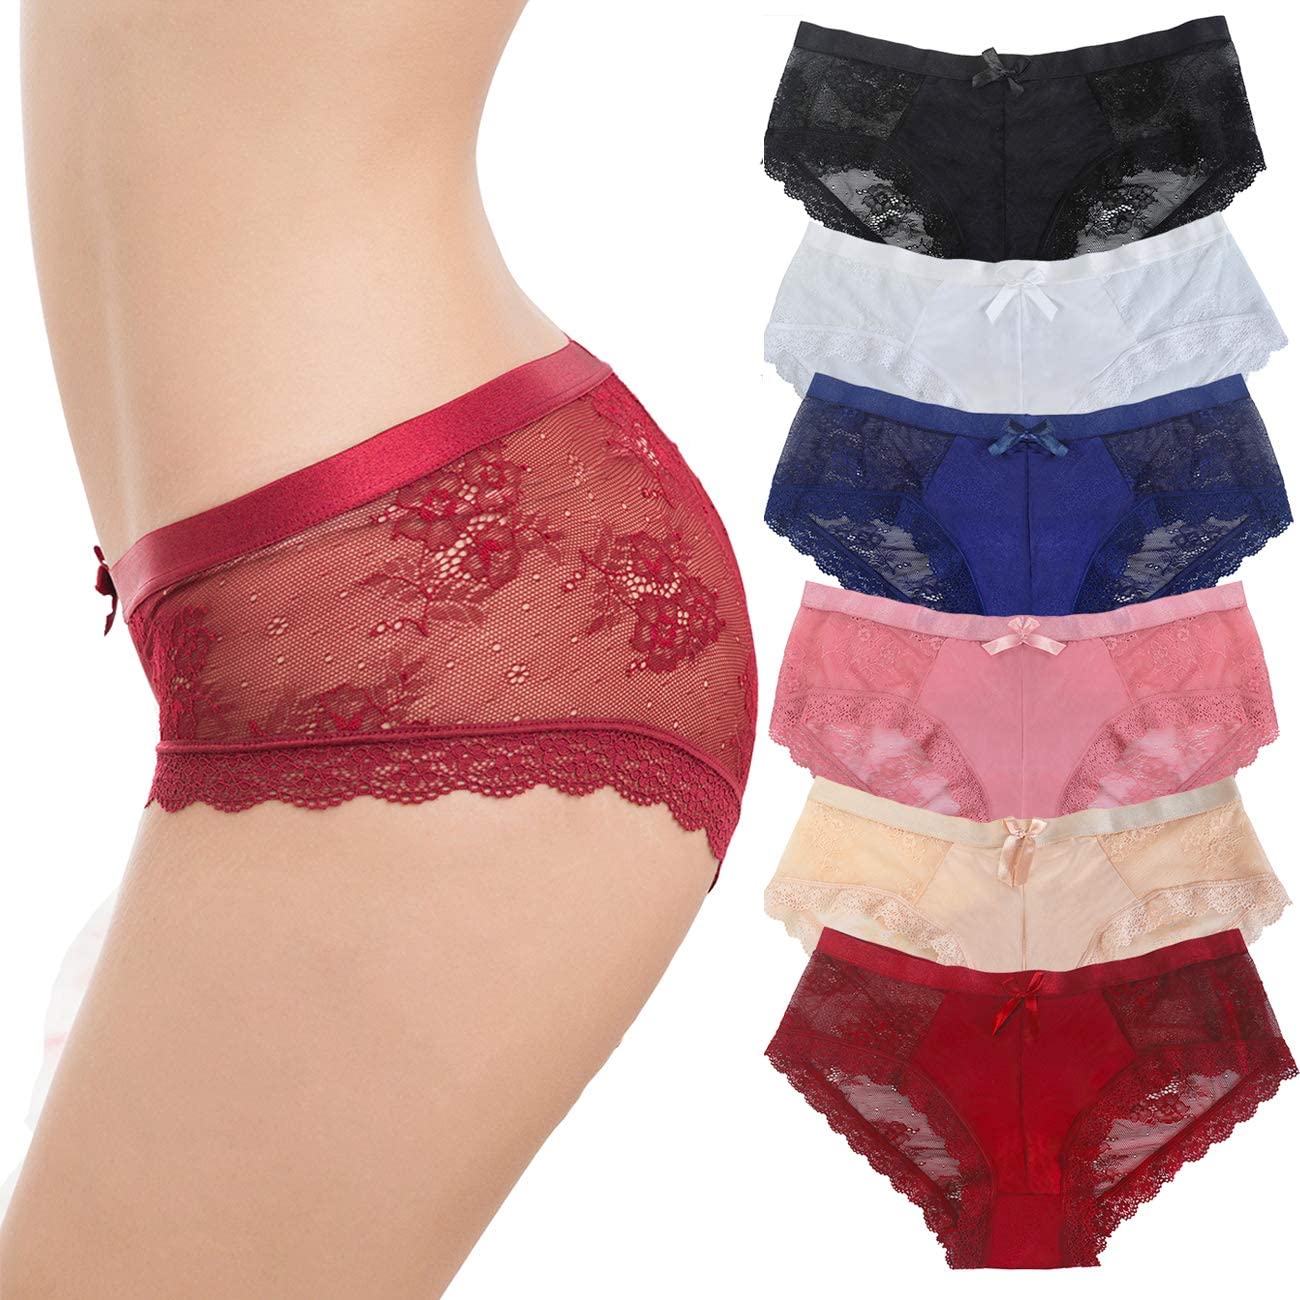 Price:$16.99 LEVAO Womens Bikini Panties Underwear Lace Hipster Seamless Sexy Hi Cuts Pack 6 at Amazon Women’s Clothing store